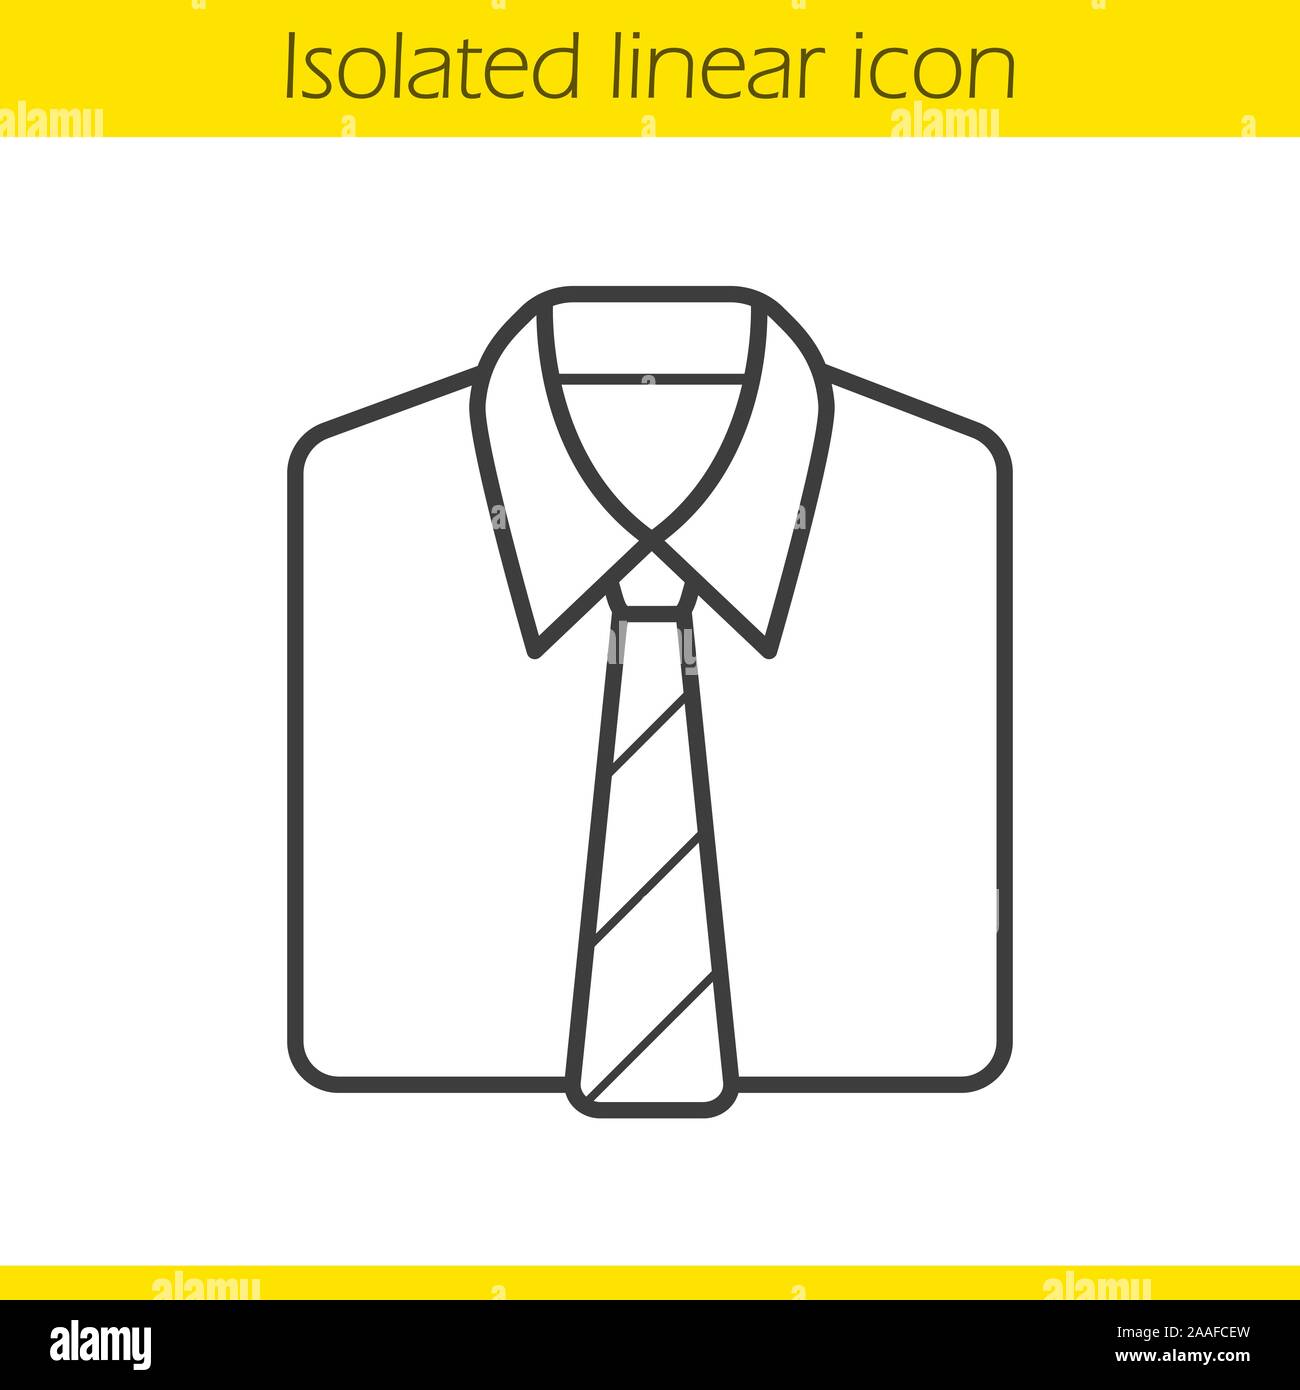 Shirt and tie linear icon. Formal men's ...